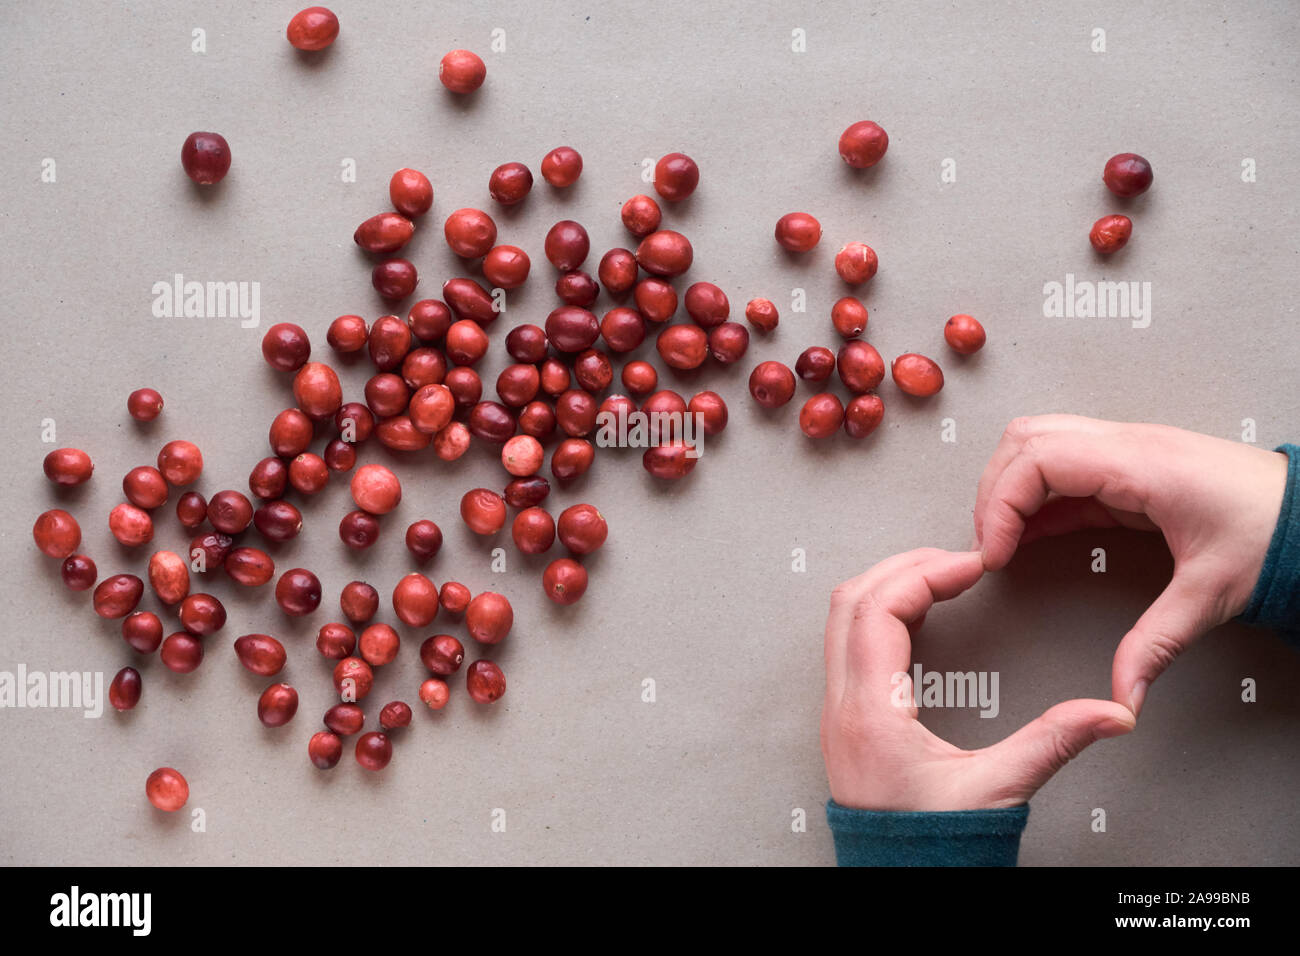 Raw fresh cranberry berry, view from above. Cranberry background, top view, flat lay on craft paper Stock Photo